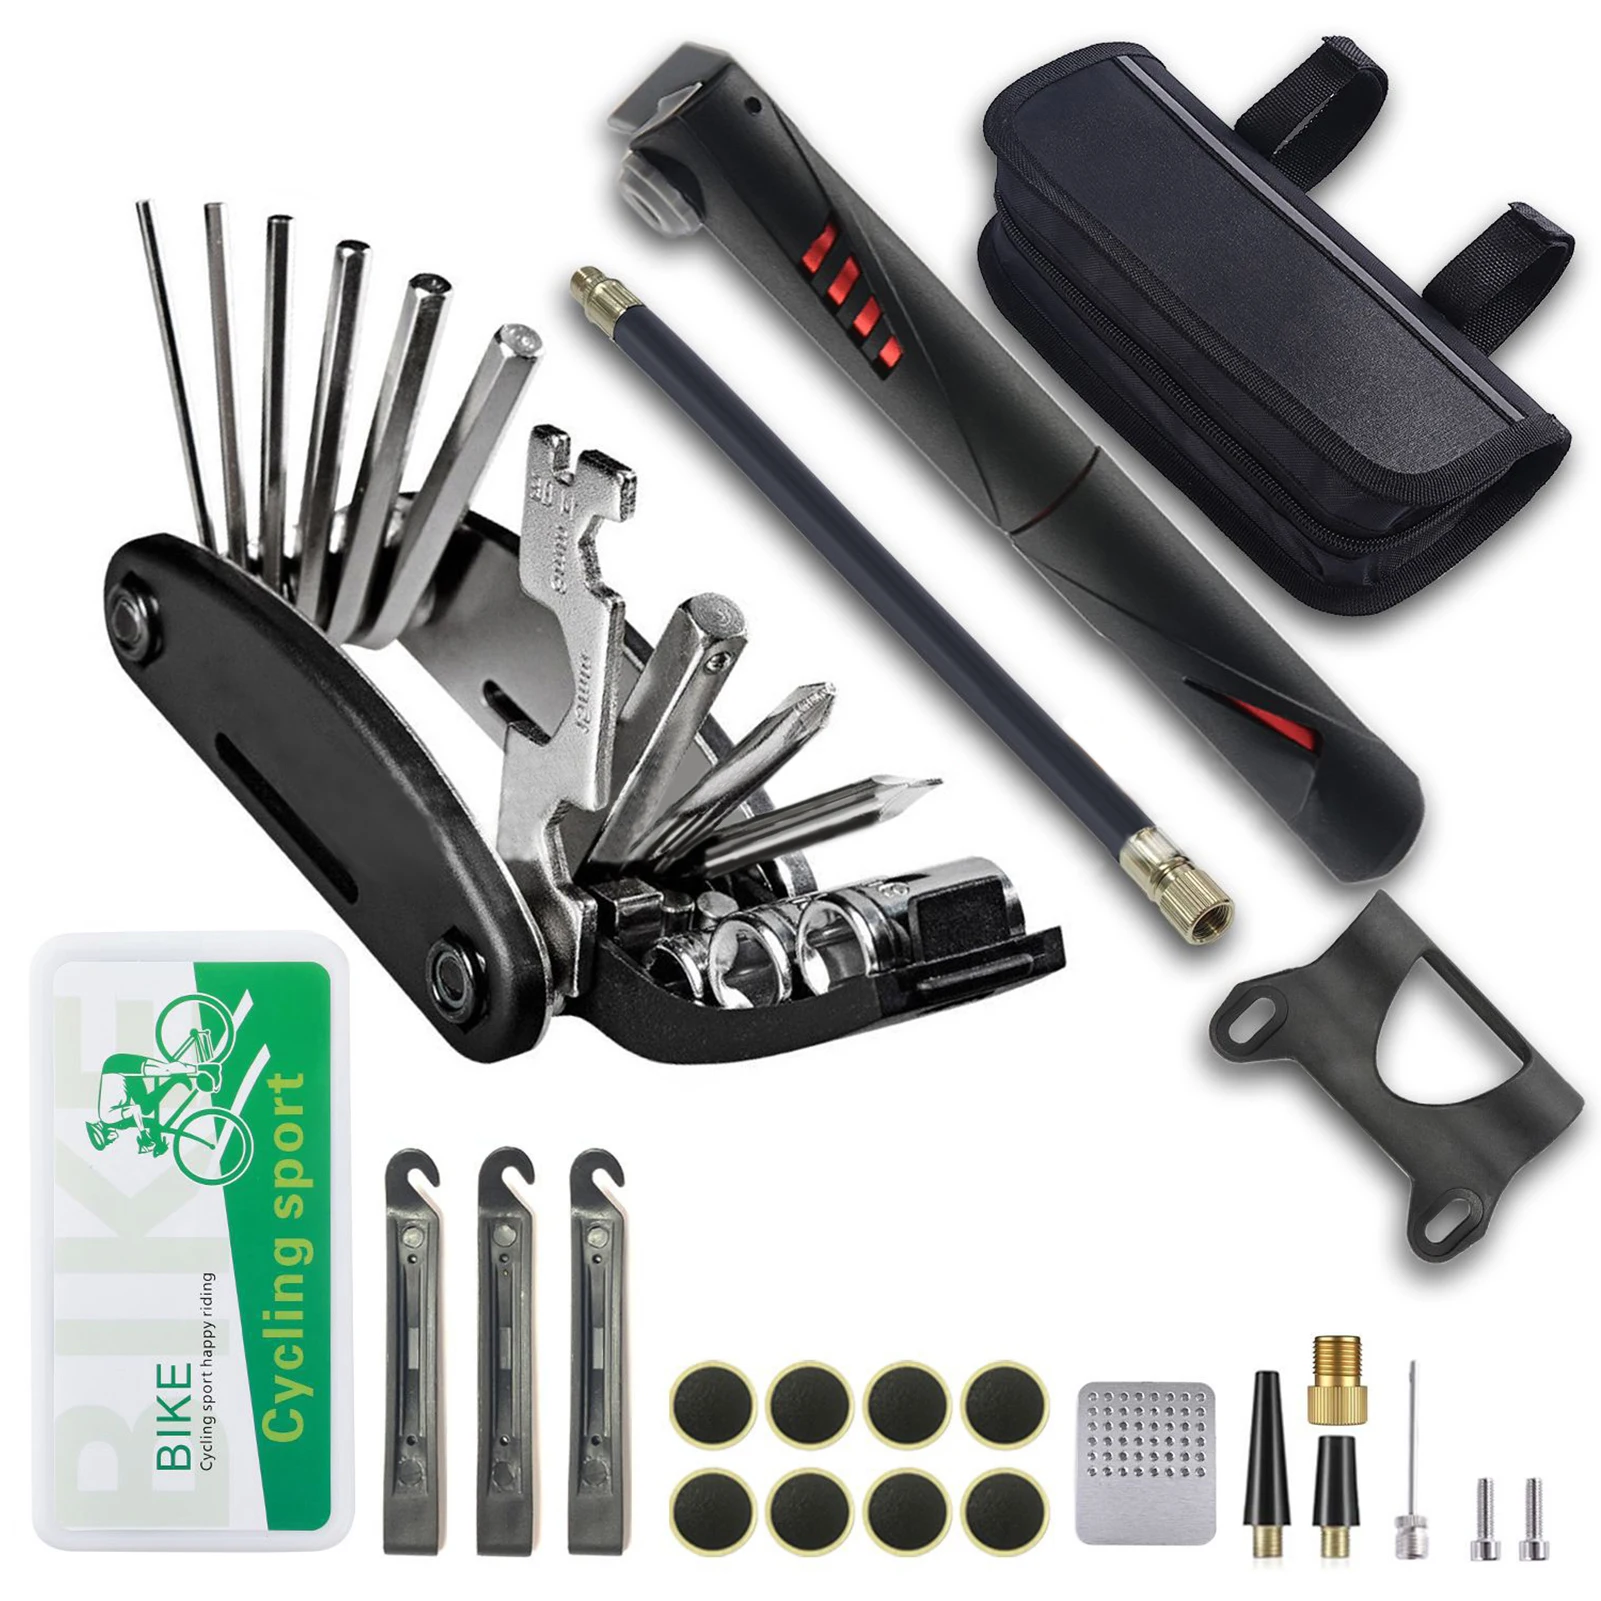 Mountain Bike Accessories with Bike Pump for BMX Cycling Fix Kit Set EYPINS Bike Puncture Repair Kit Bicycle Maintenance kit with Pouch 16 in 1 Bicycle Multi Tool Bike Tool Kit 